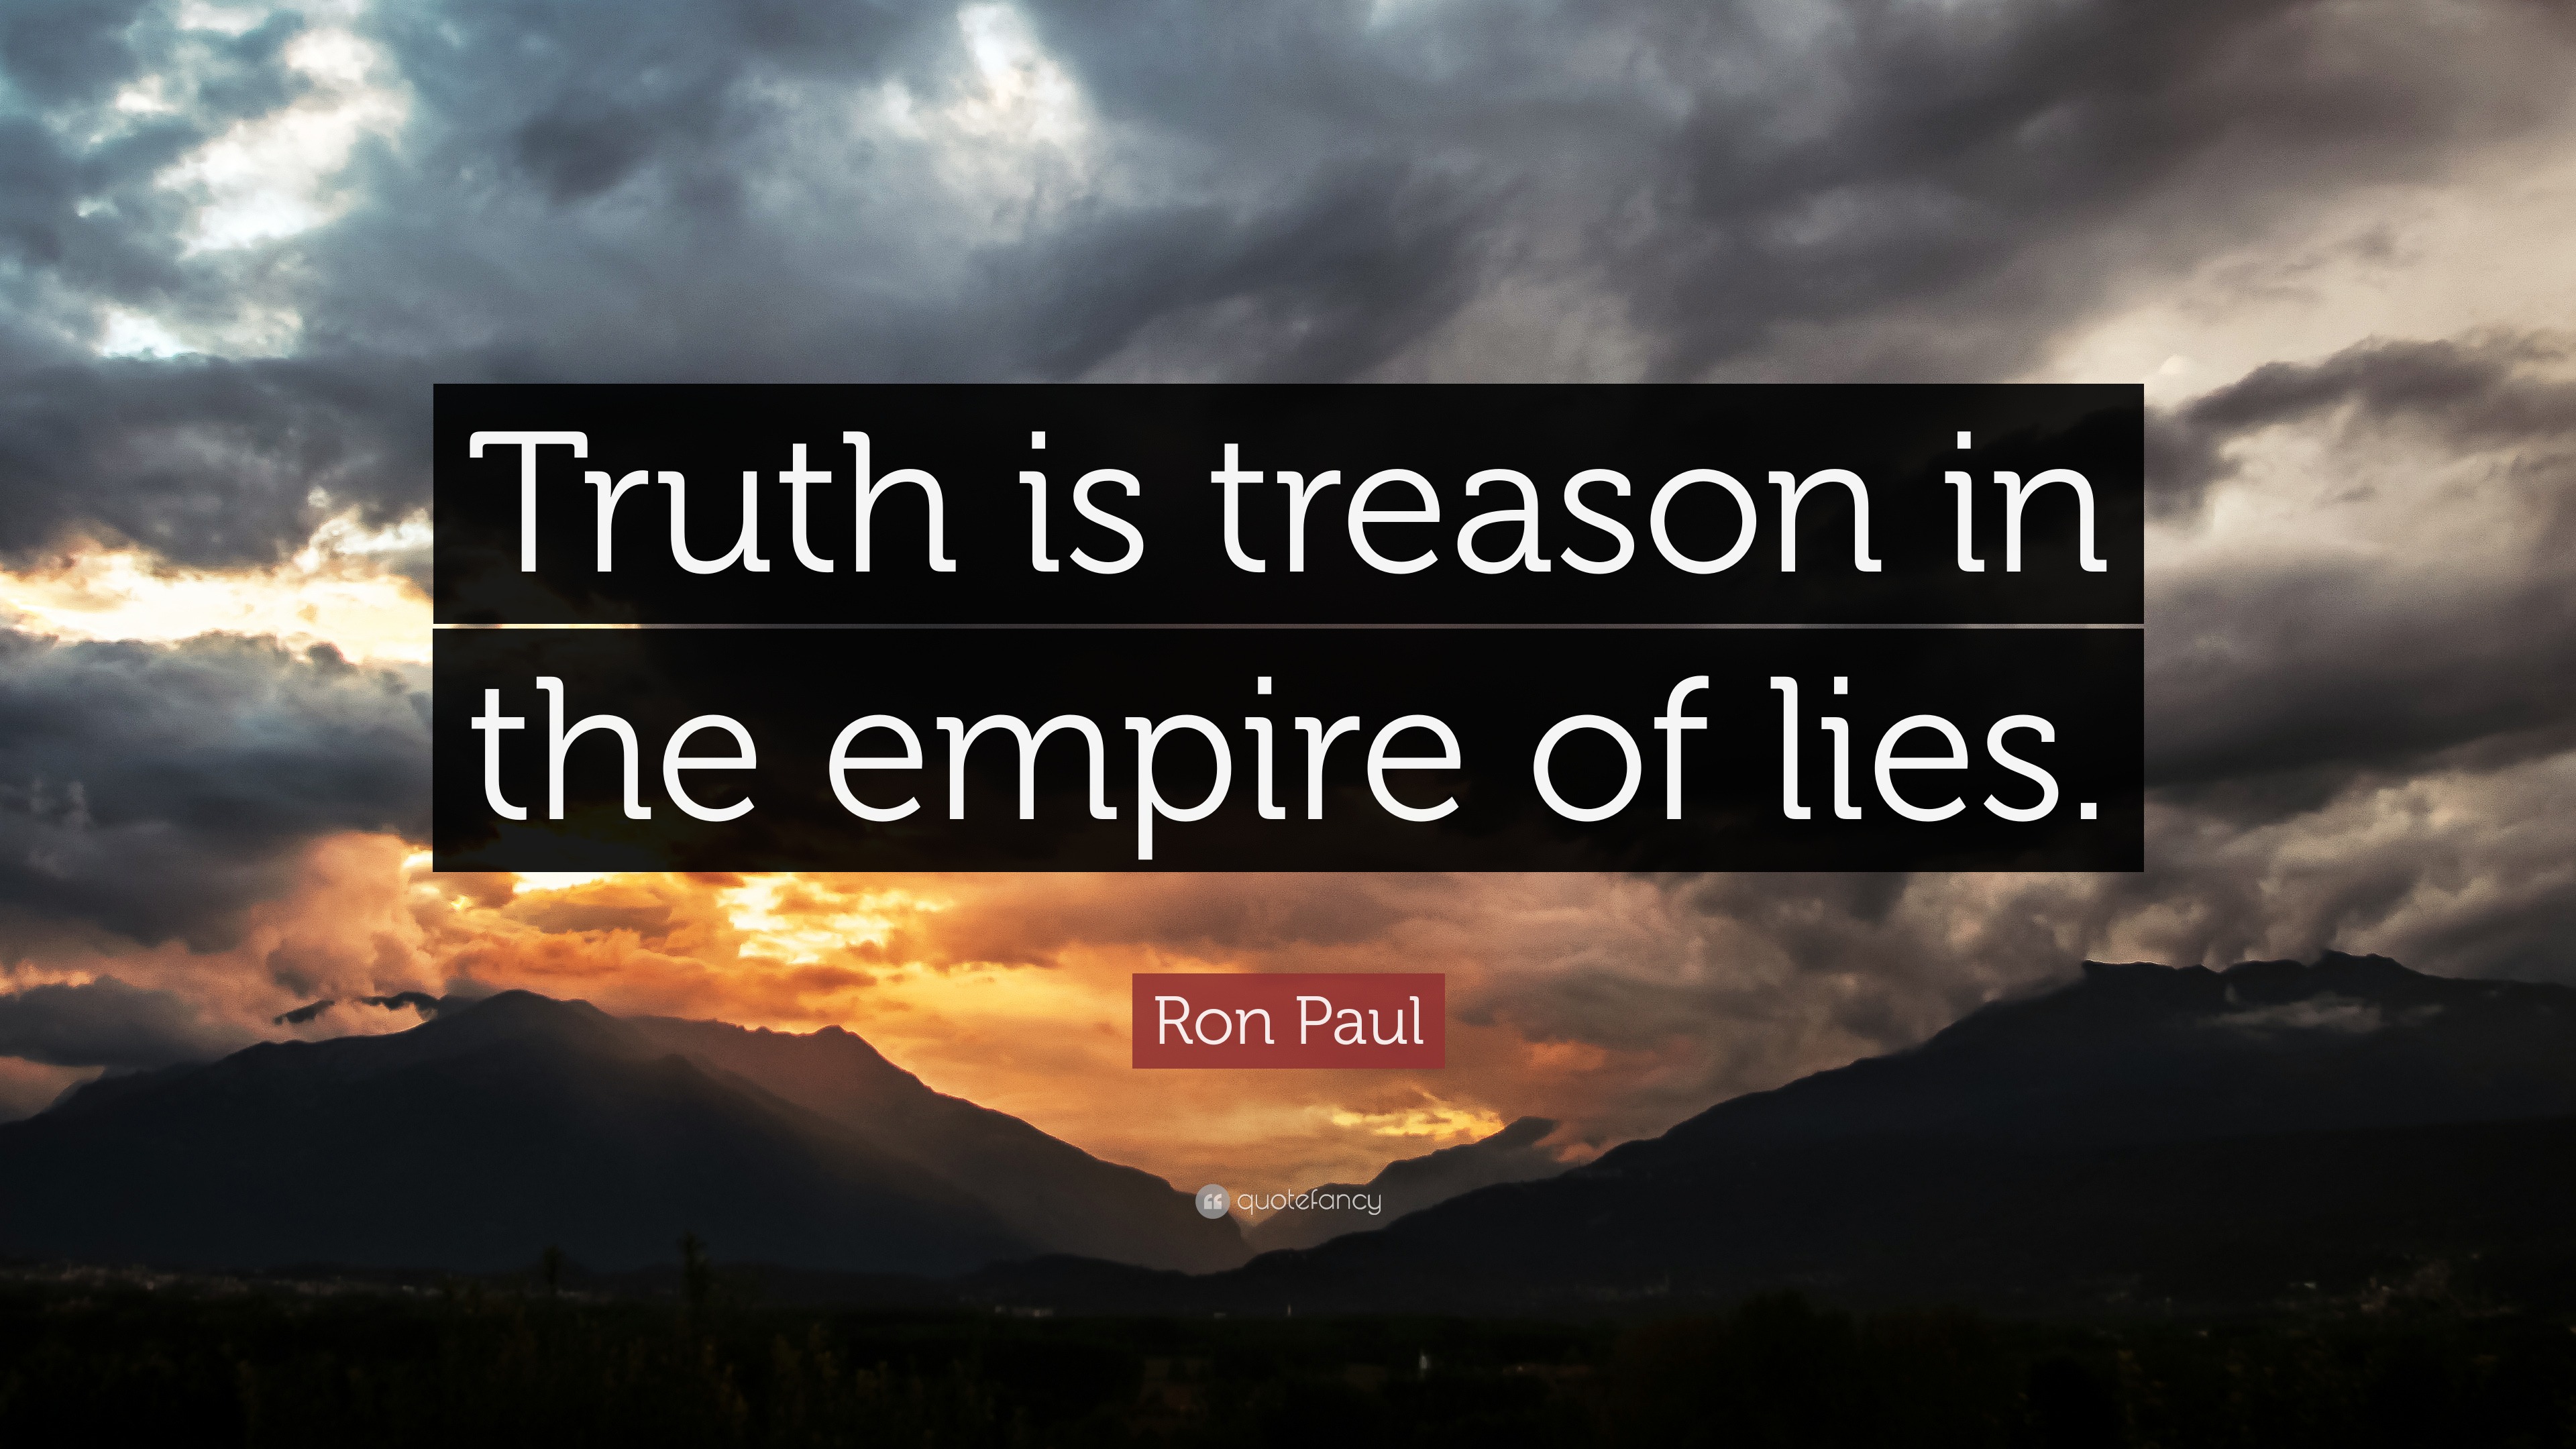 2031286-Ron-Paul-Quote-Truth-is-treason-in-the-empire-of-lies.jpg